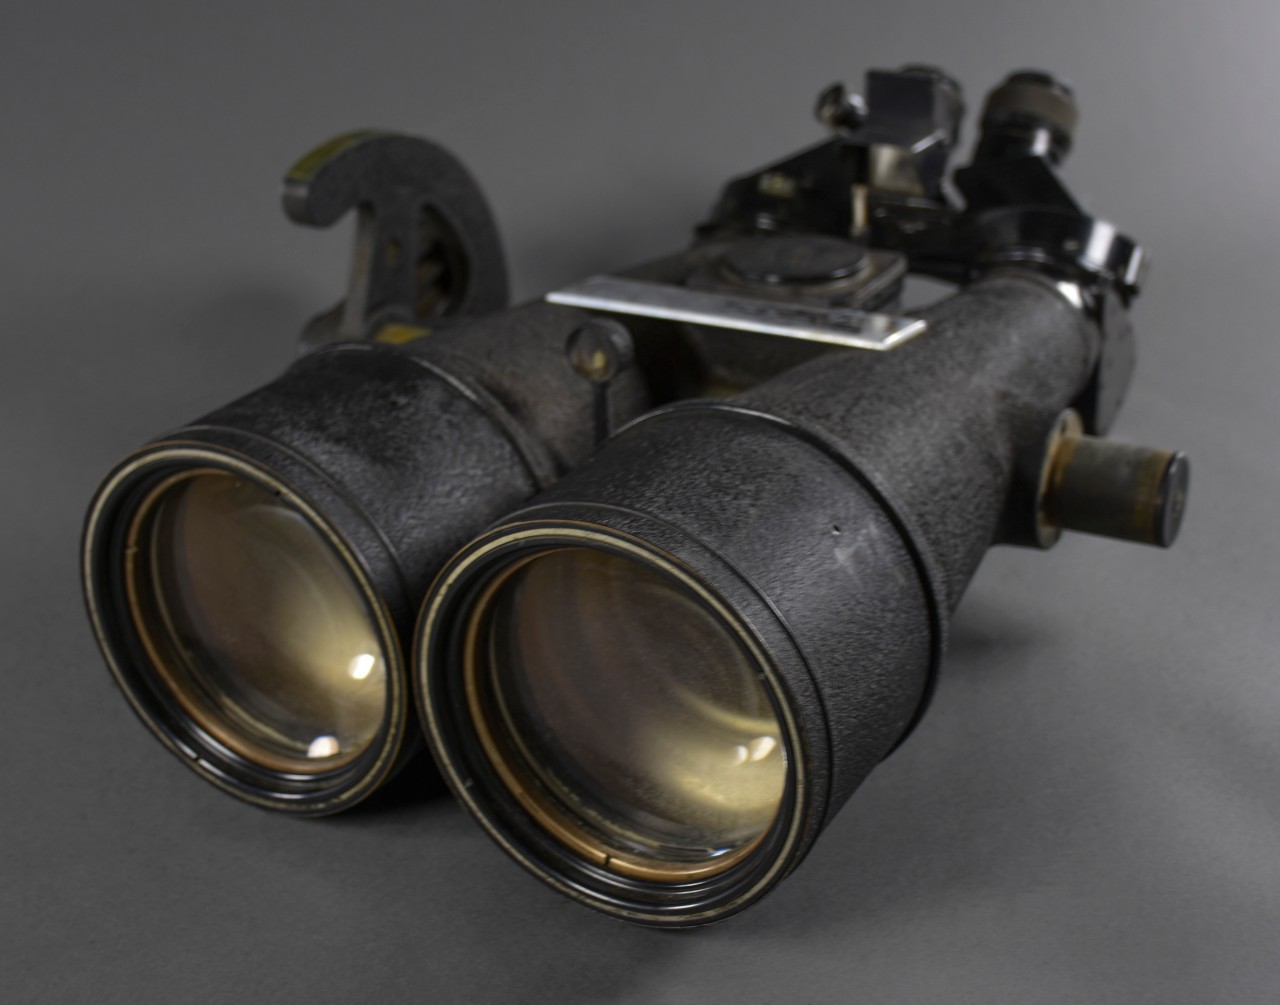 Black Big Eye Binoculars with presentation plaque on top. Japanese characters on various sections of the binoculars 